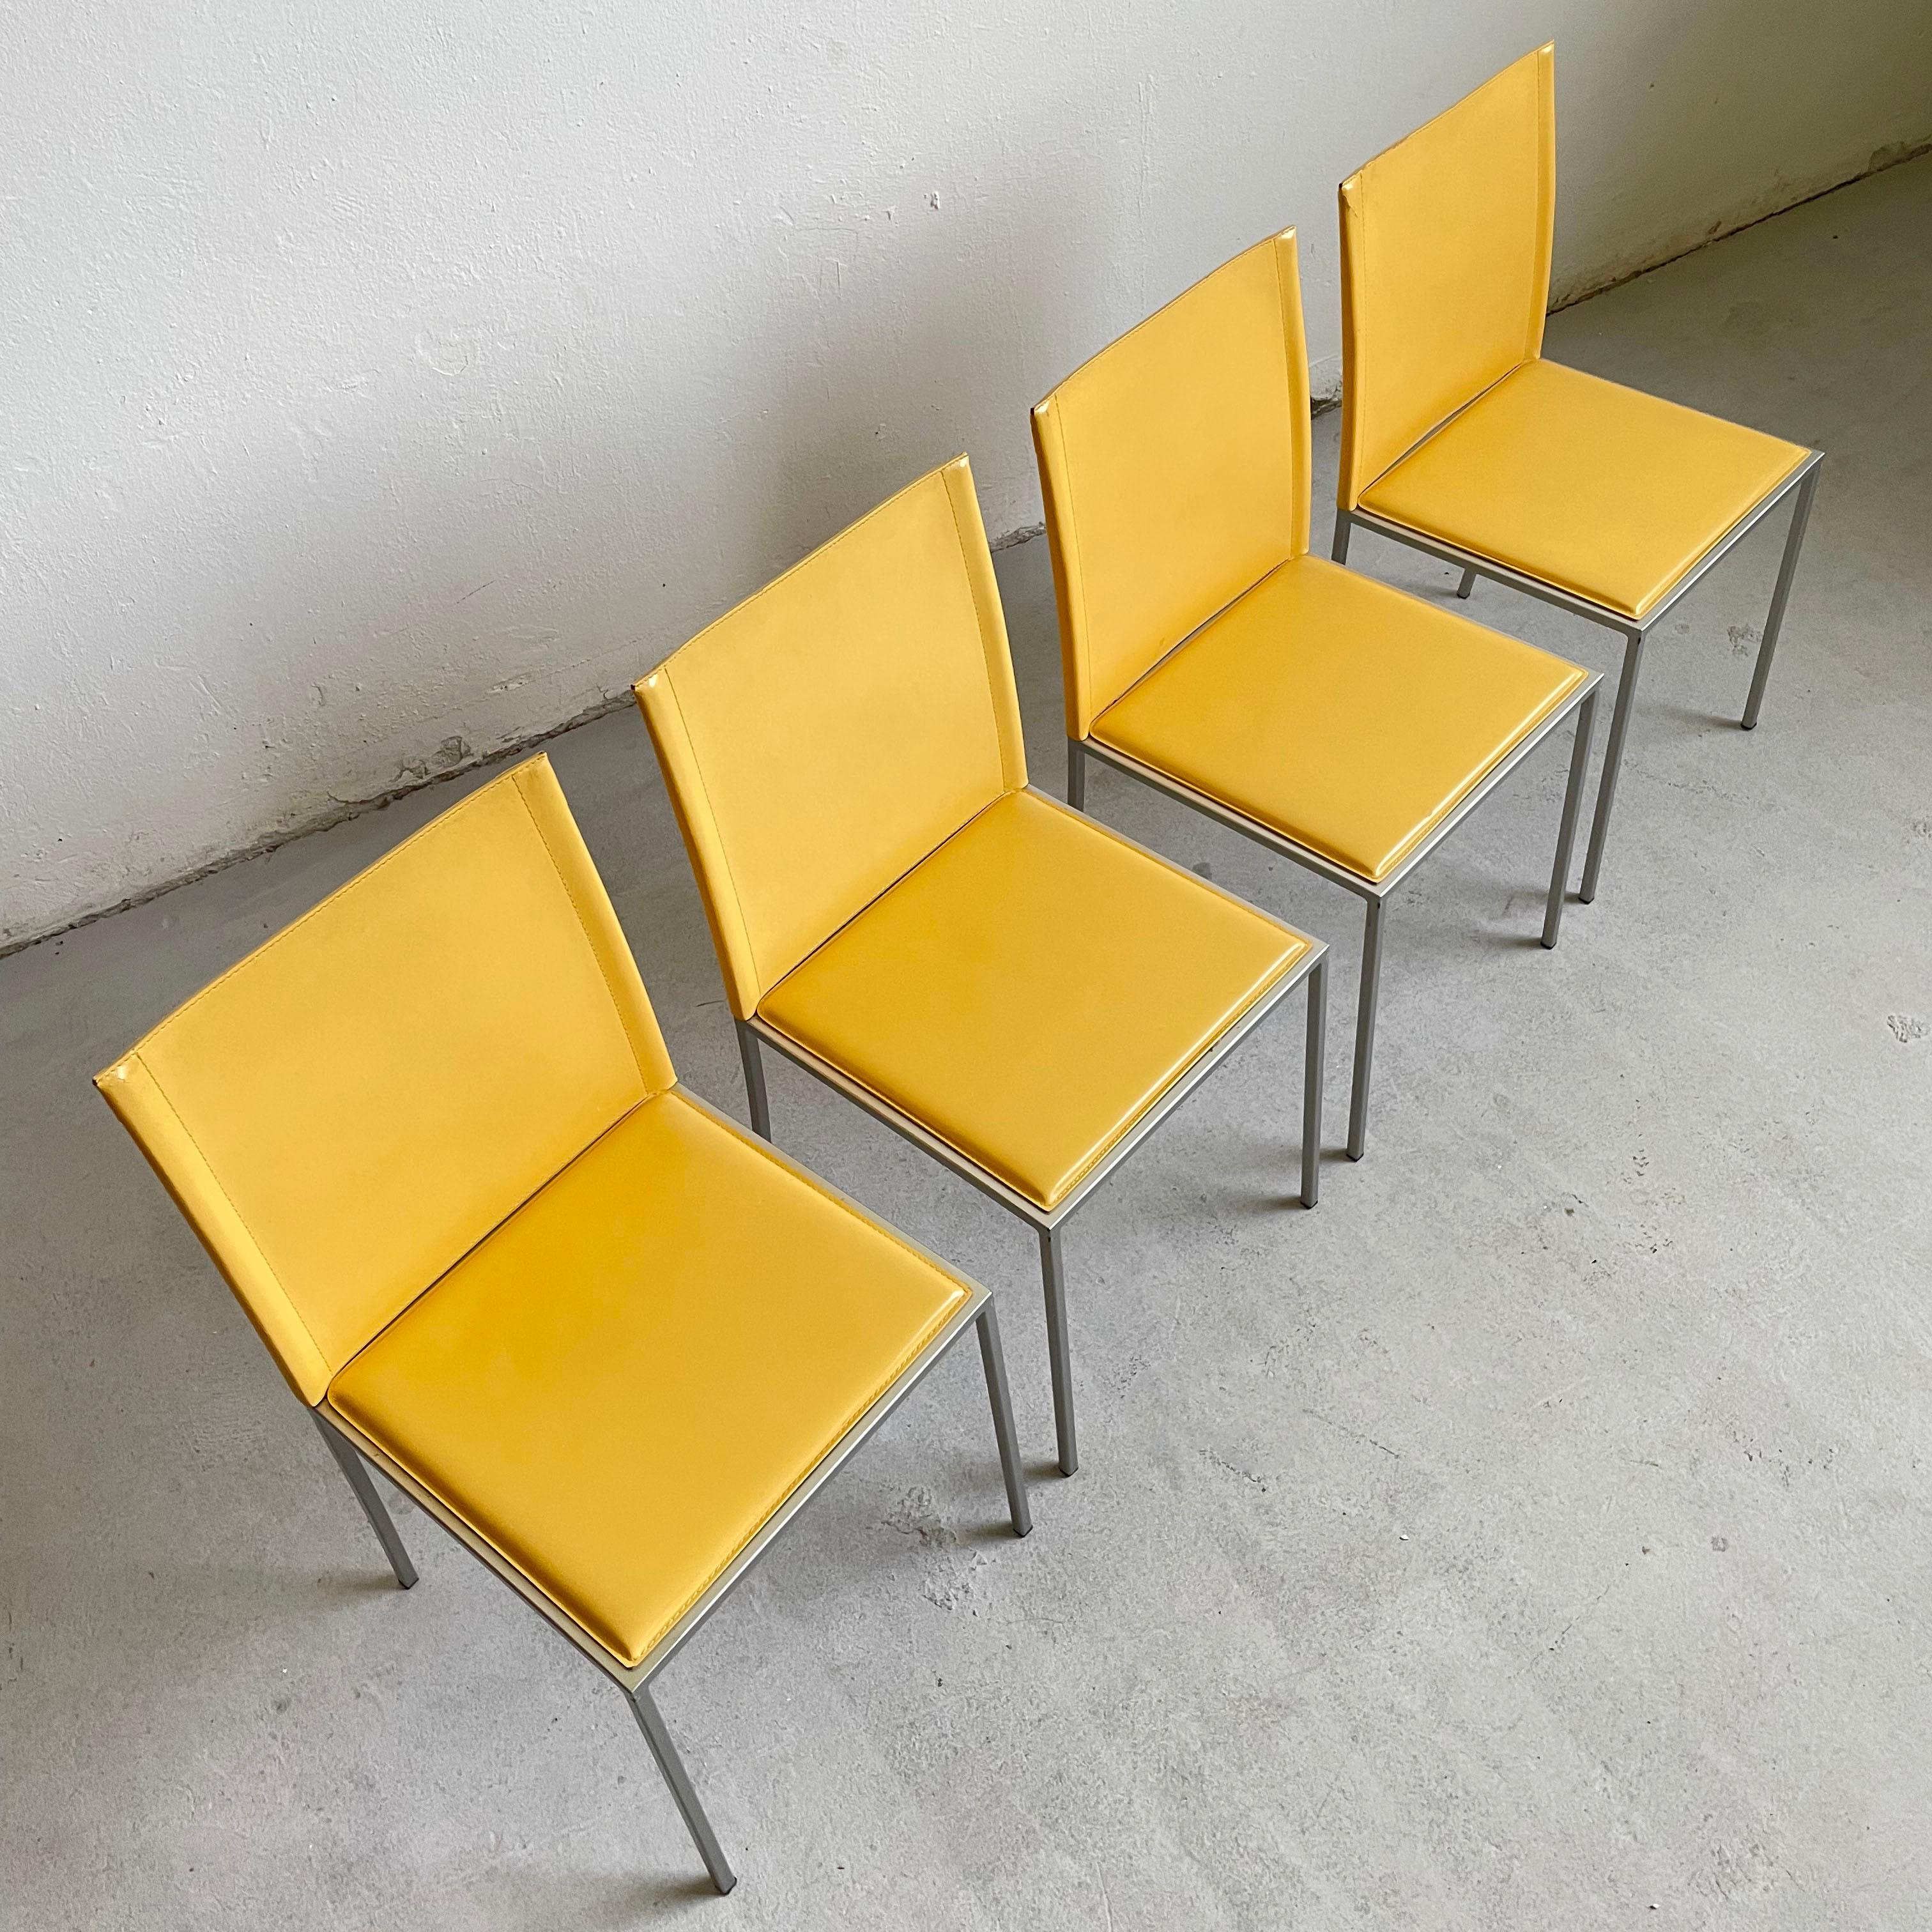 Metal Set of 4 Italian Minimalist Modernist Leather Chairs by Calligaris, Italy 1990s For Sale